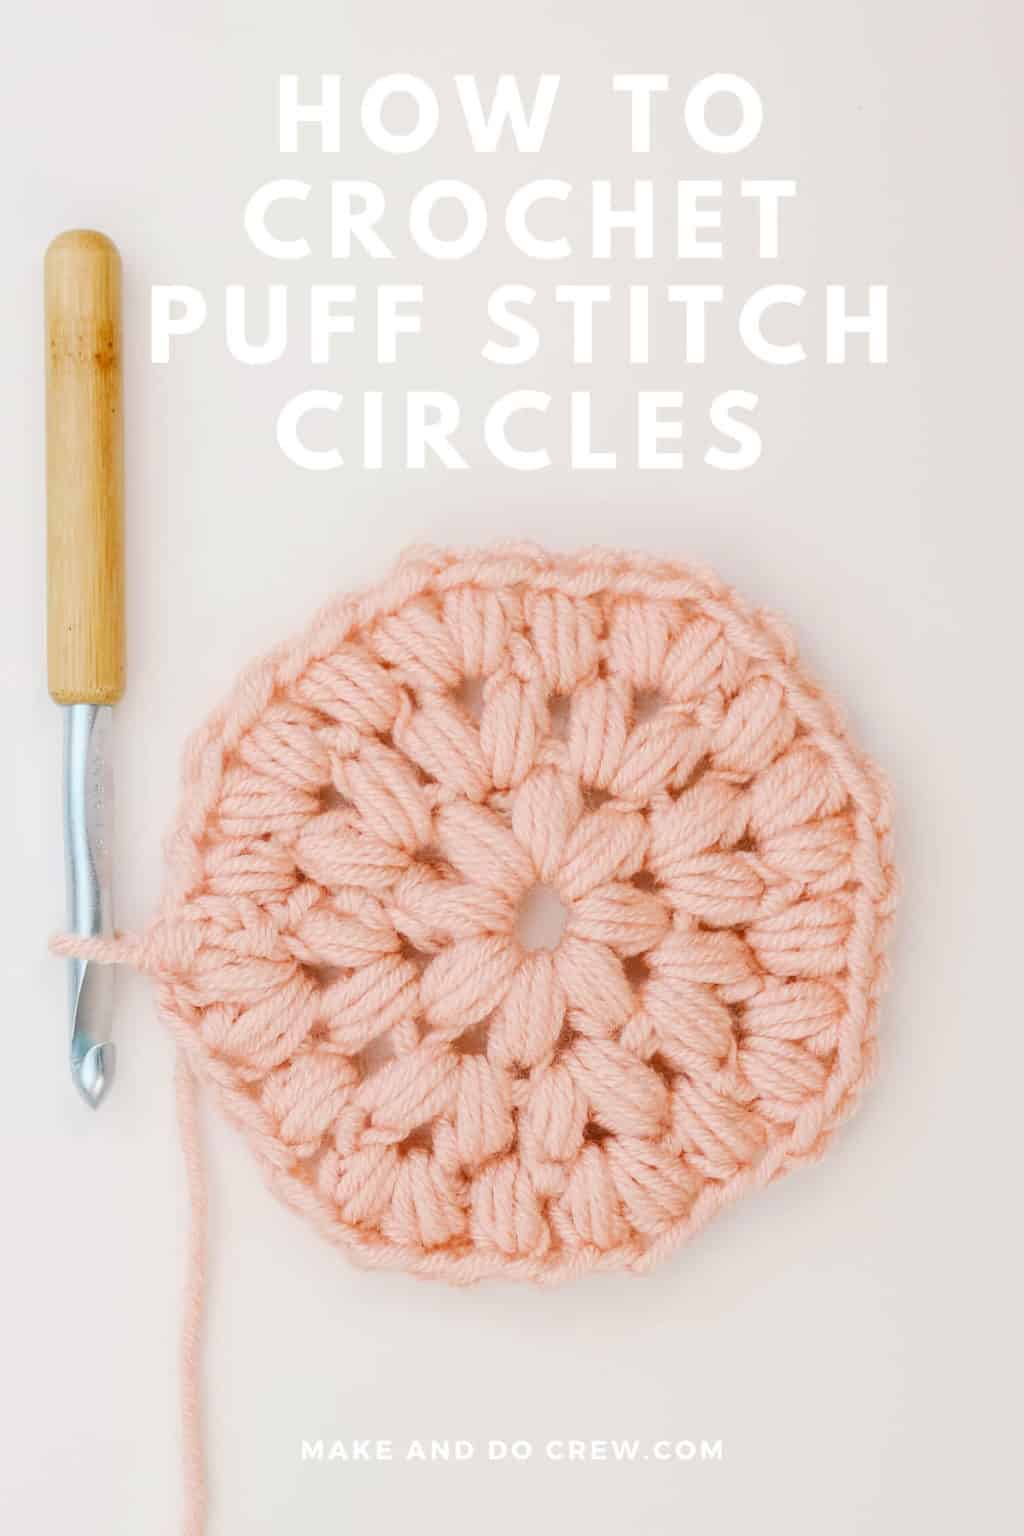 How to Crochet Puff Stitches: Complete Beginner's Guide (detailed video ...